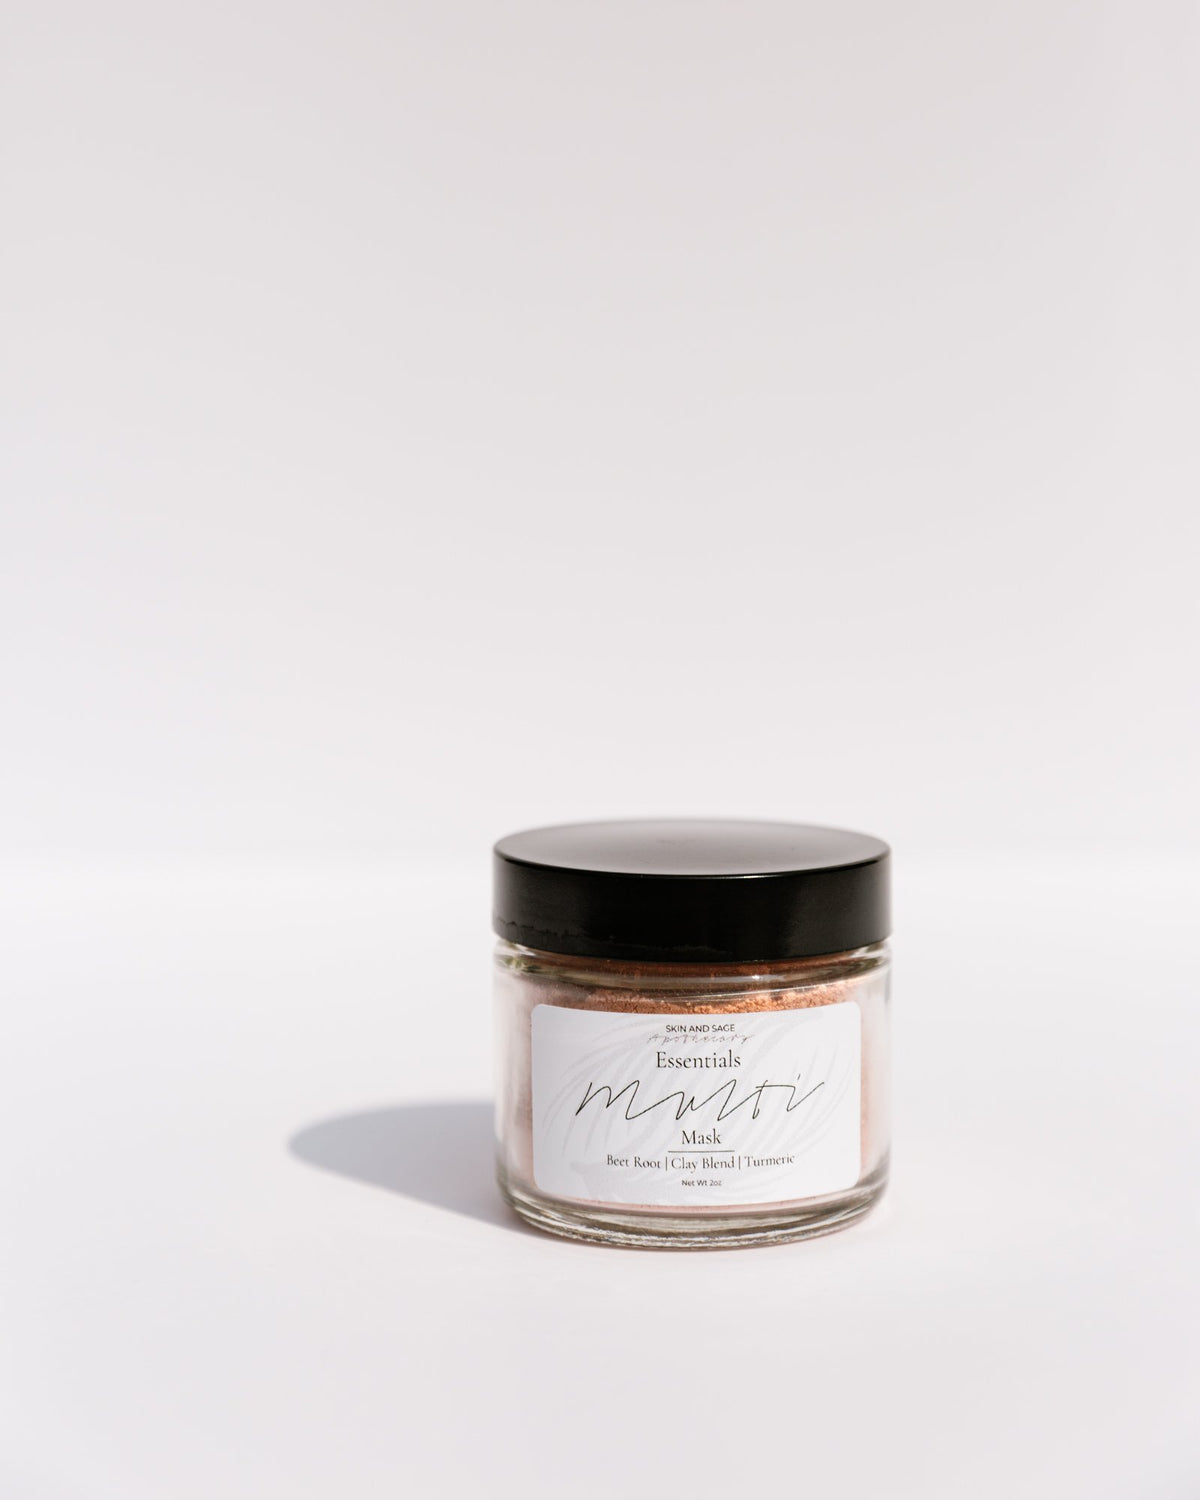 Essentials Multi Mask - Skin and Sage Apothecary